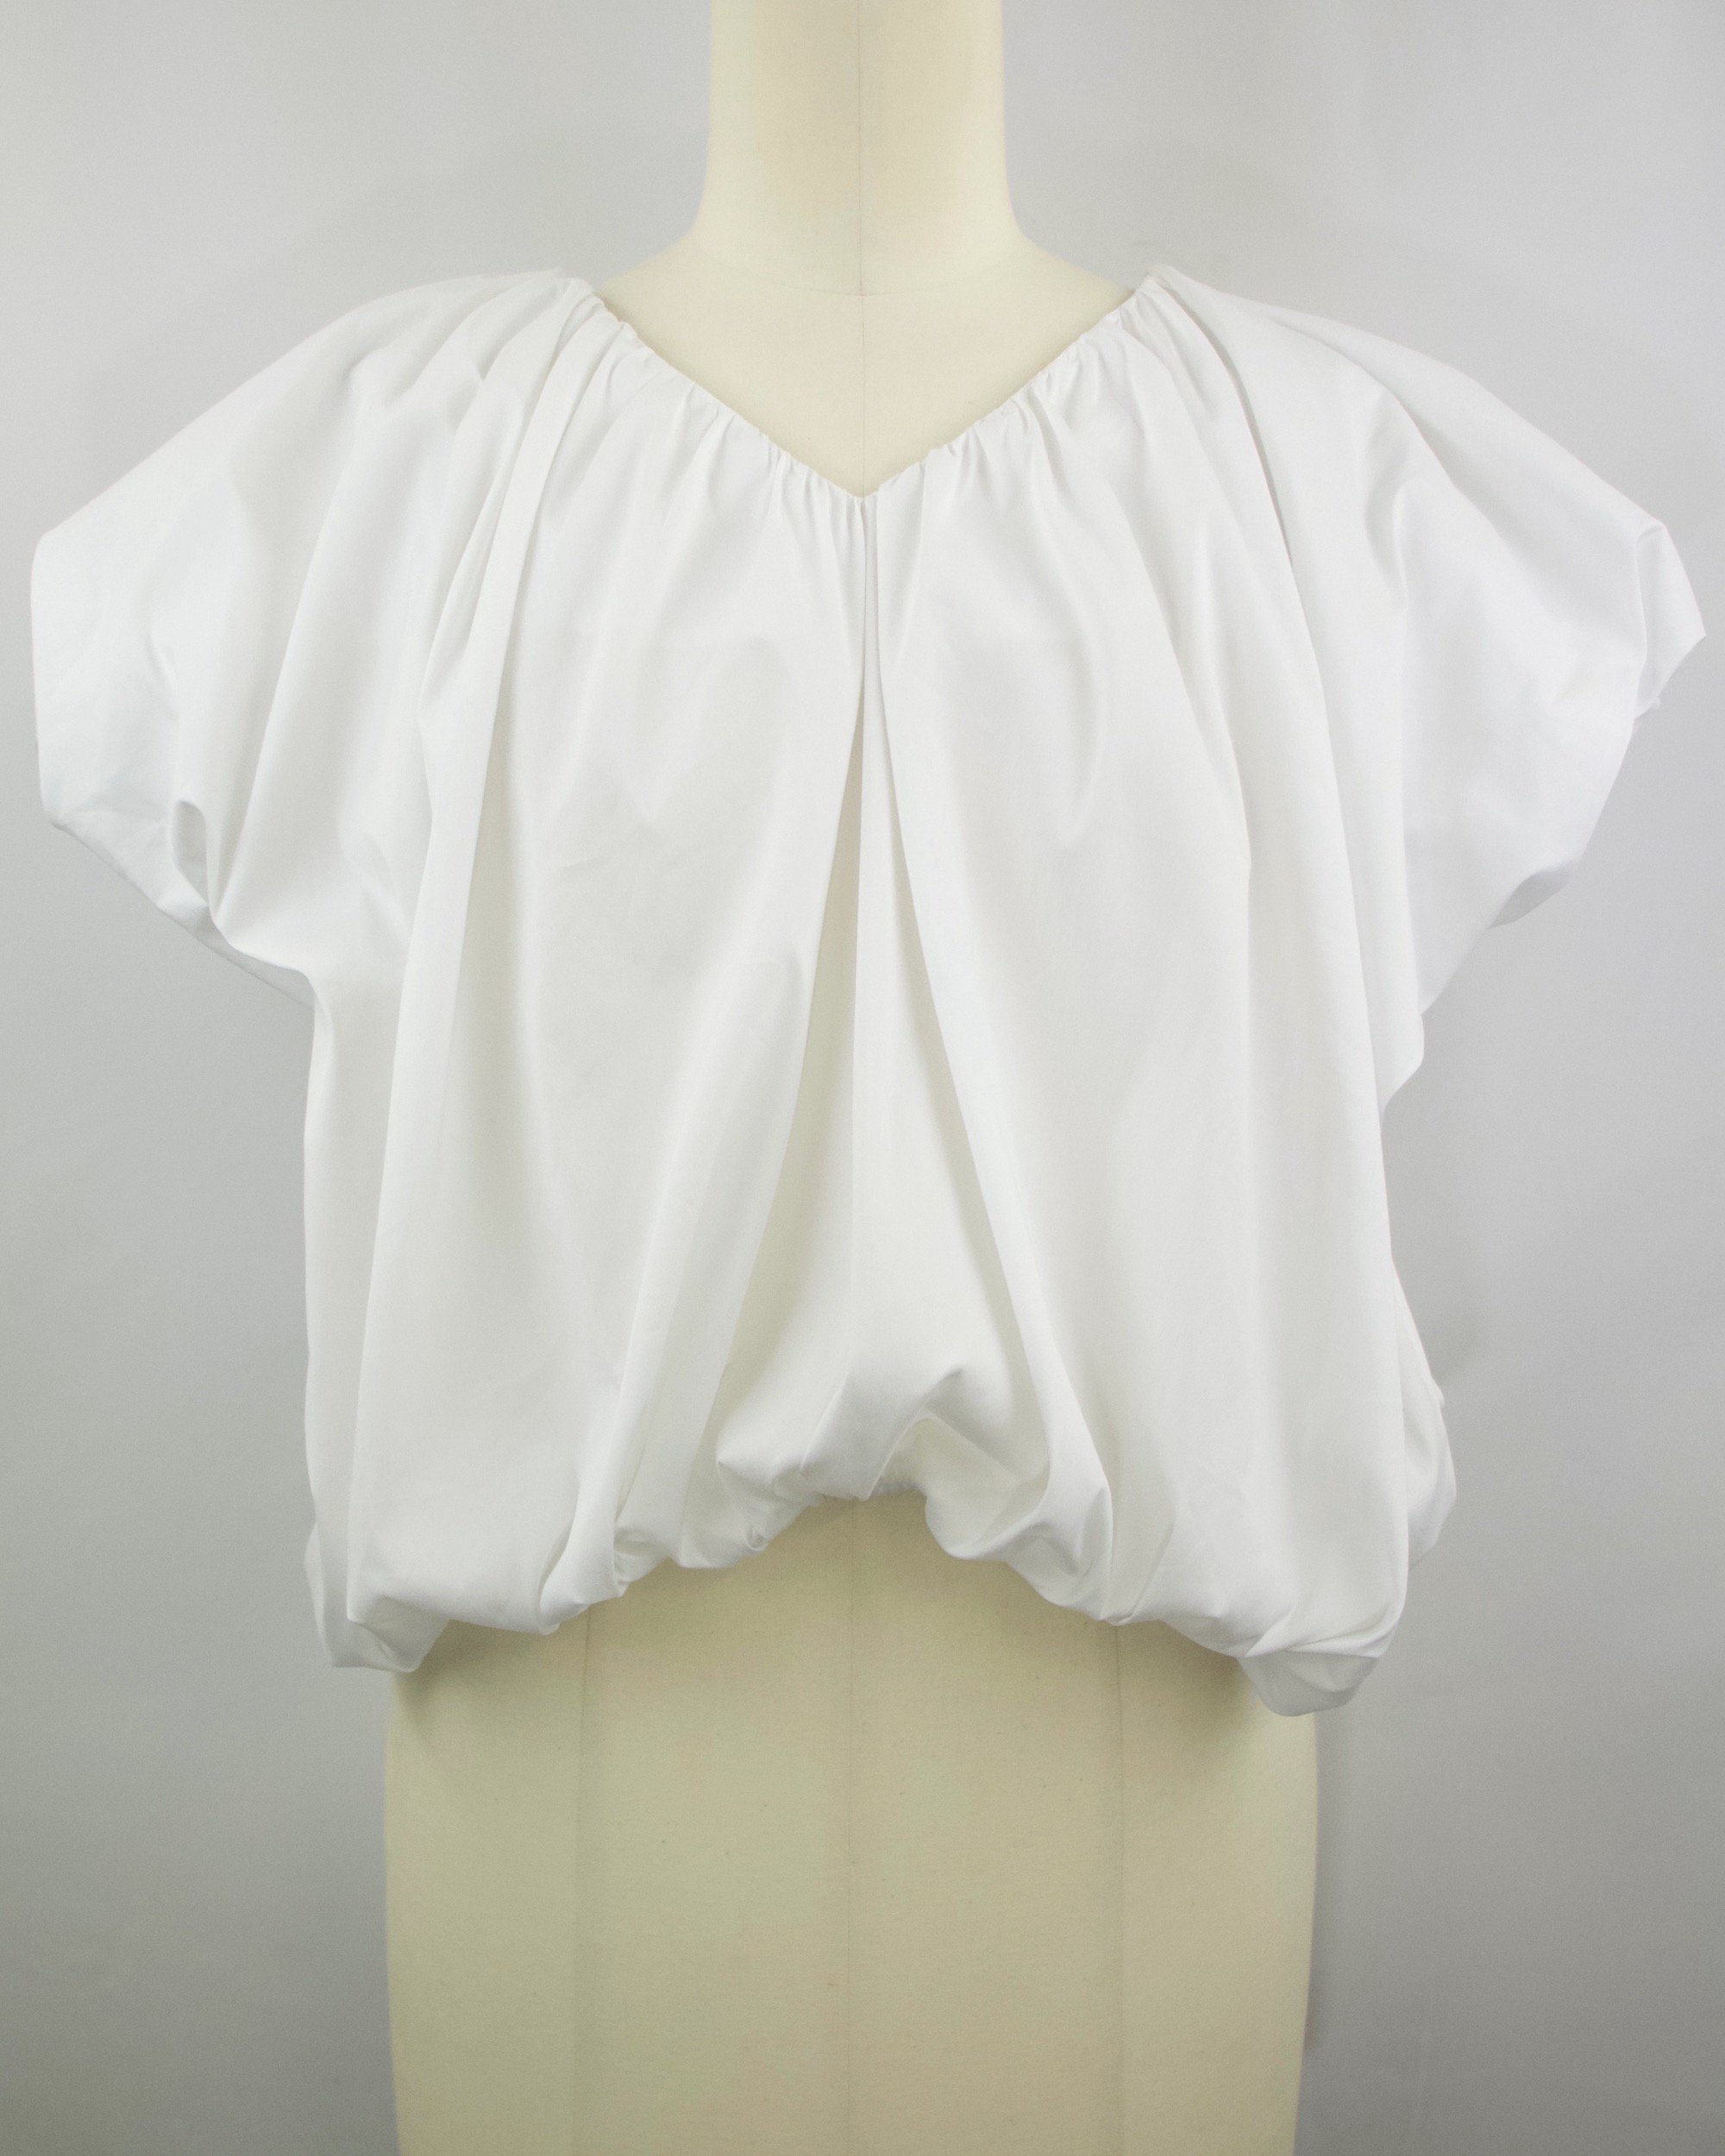 <img class='new_mark_img1' src='https://img.shop-pro.jp/img/new/icons8.gif' style='border:none;display:inline;margin:0px;padding:0px;width:auto;' />f’s6 Balloon Blouse